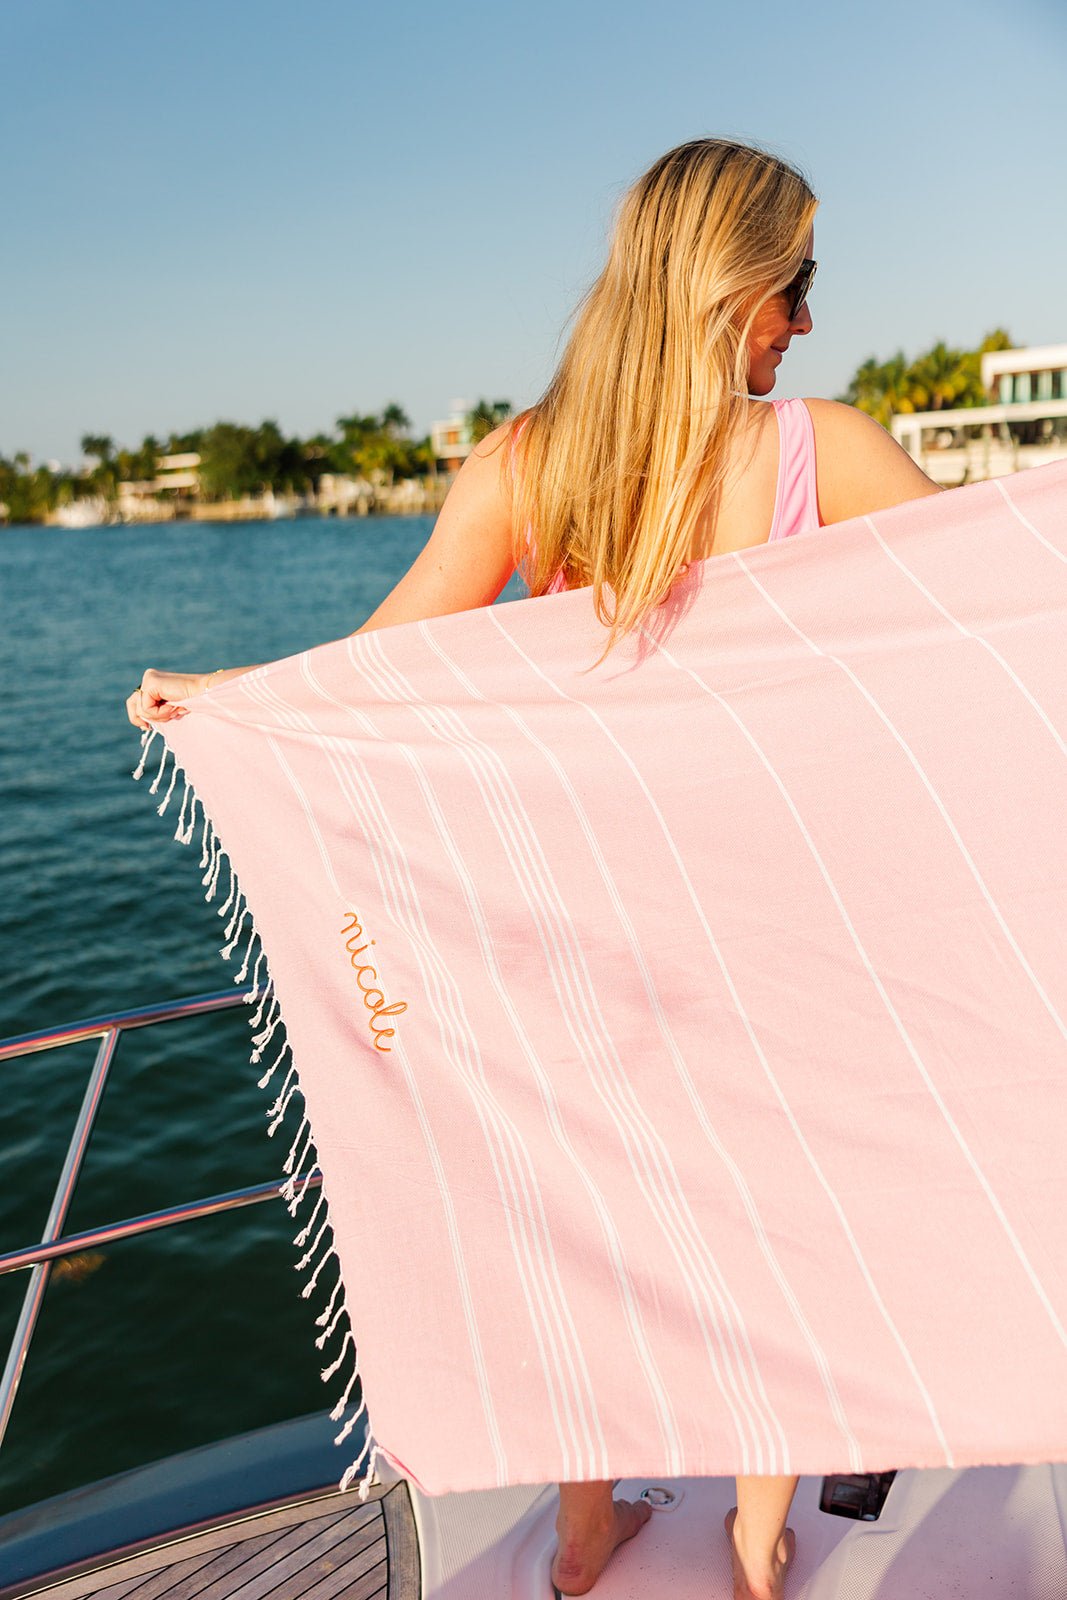 FREE BEACH BLANKET (You're welcome) - Victoria's Secret Email Archive